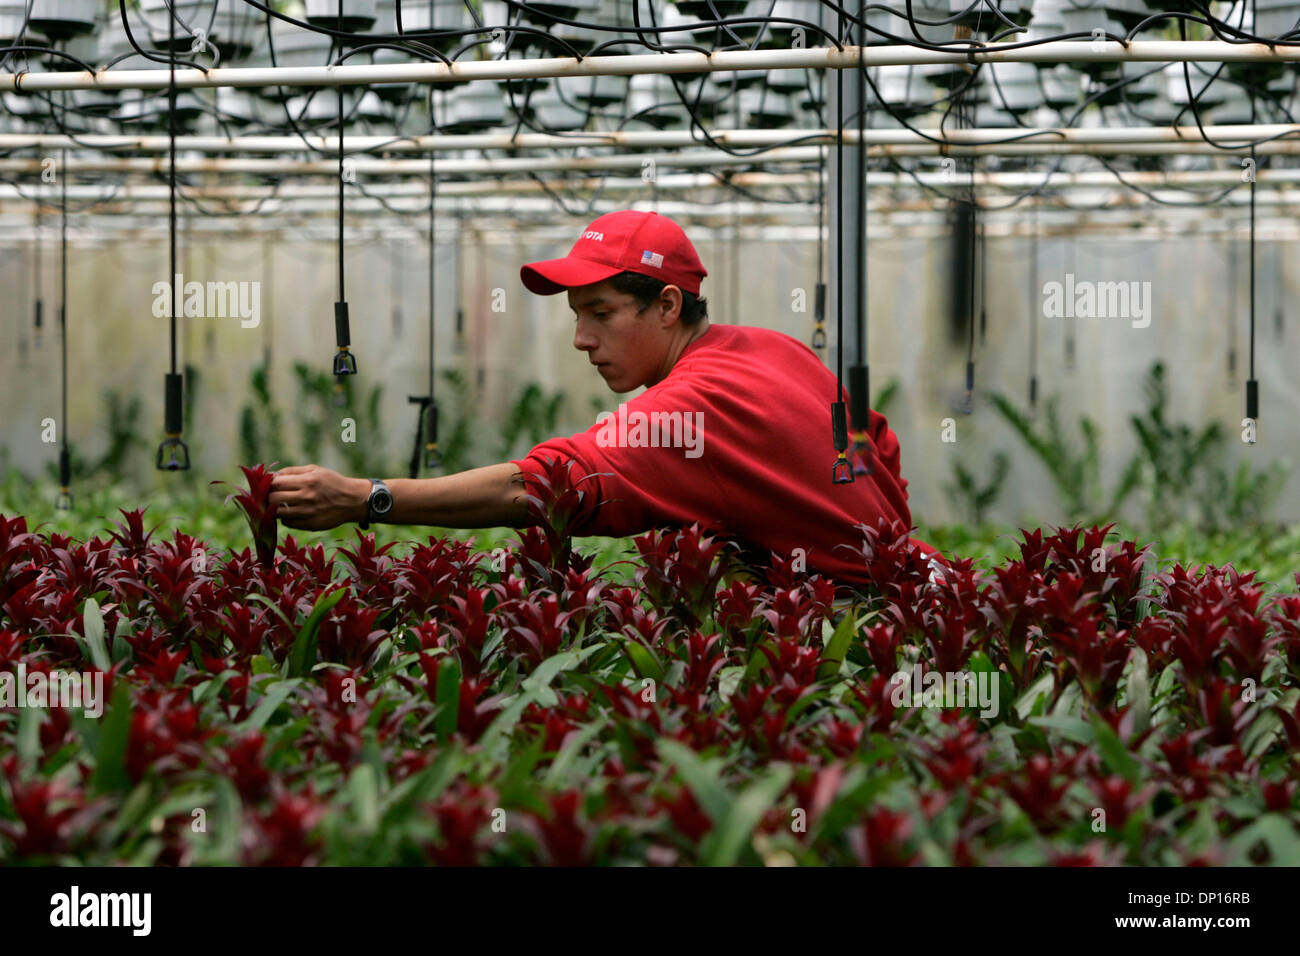 Apr 21, 2006; Fallbrook, CA, USA; ISRAEL ISLAS MURILLO trims the tips of a variety of Guzmania Bromeliad, called, 'Red Anton', to prepare them for shipping from Olive Hill Greenhouses in Fallbrook. The company is a big producer of bromeliads, orchids and indoor plants.  Mandatory Credit: Photo by Laura Embry/SDU-T /ZUMA Press. (©) Copyright 2006 by SDU-T Stock Photo